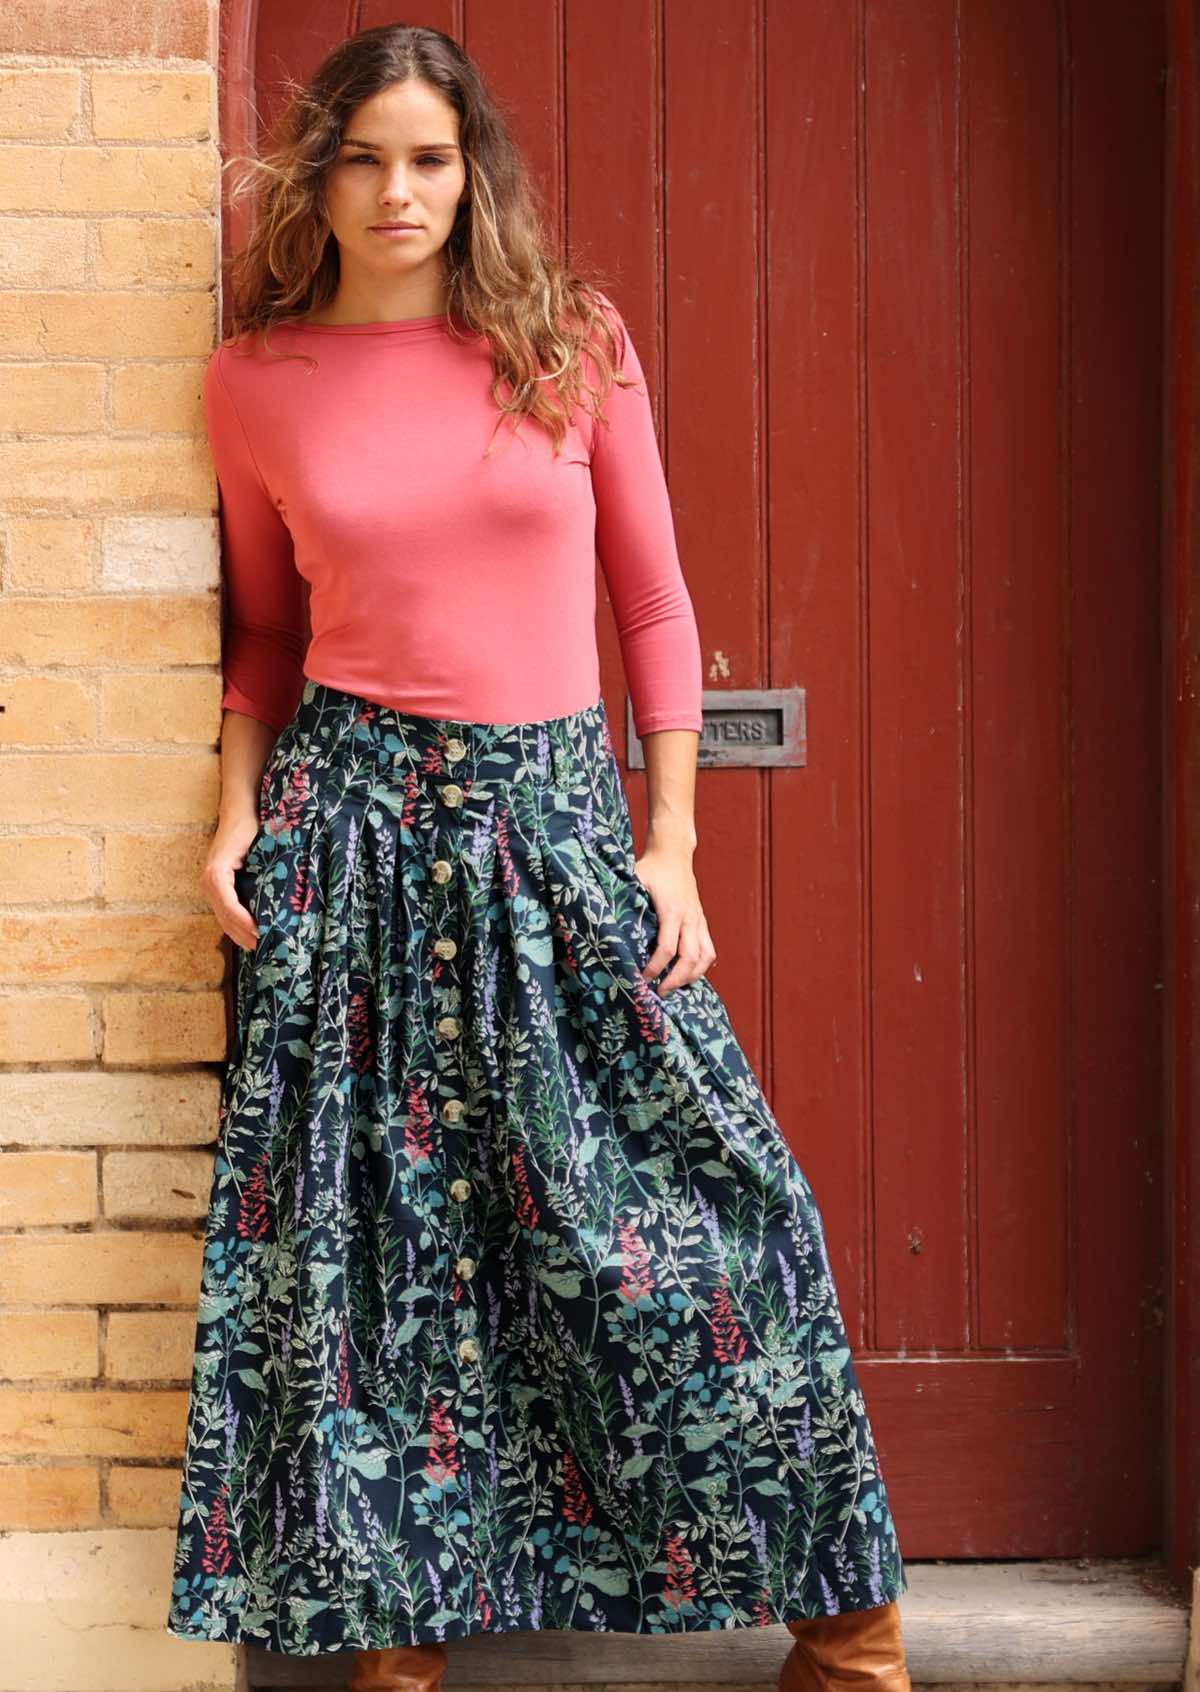 Shin length cotton generous A-line skirt with pockets